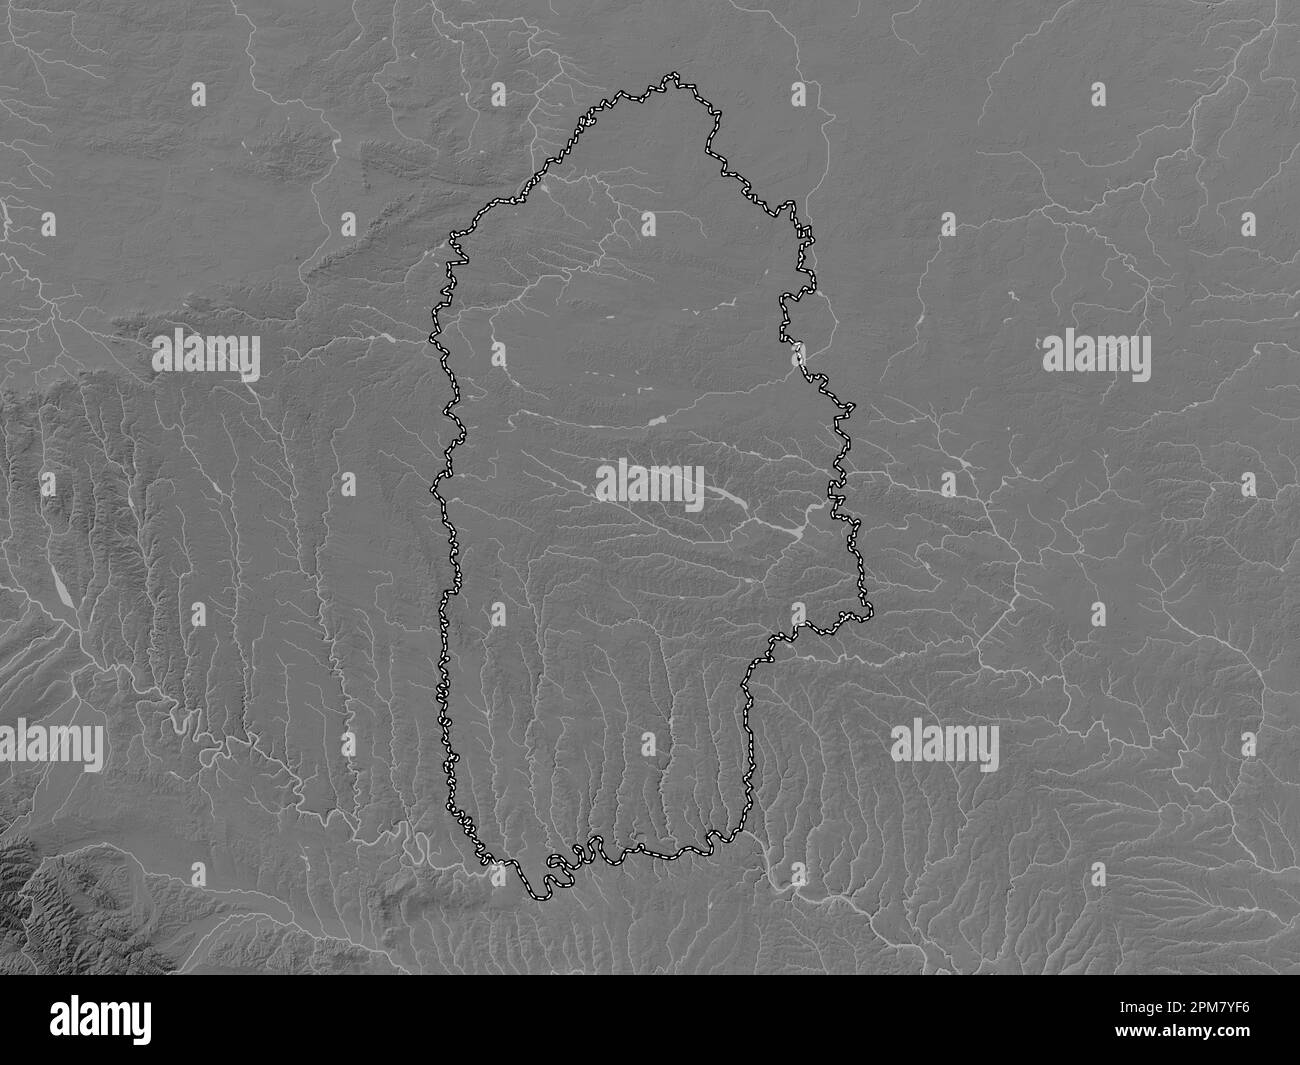 Khmel'nyts'kyy, region of Ukraine. Grayscale elevation map with lakes and rivers Stock Photo